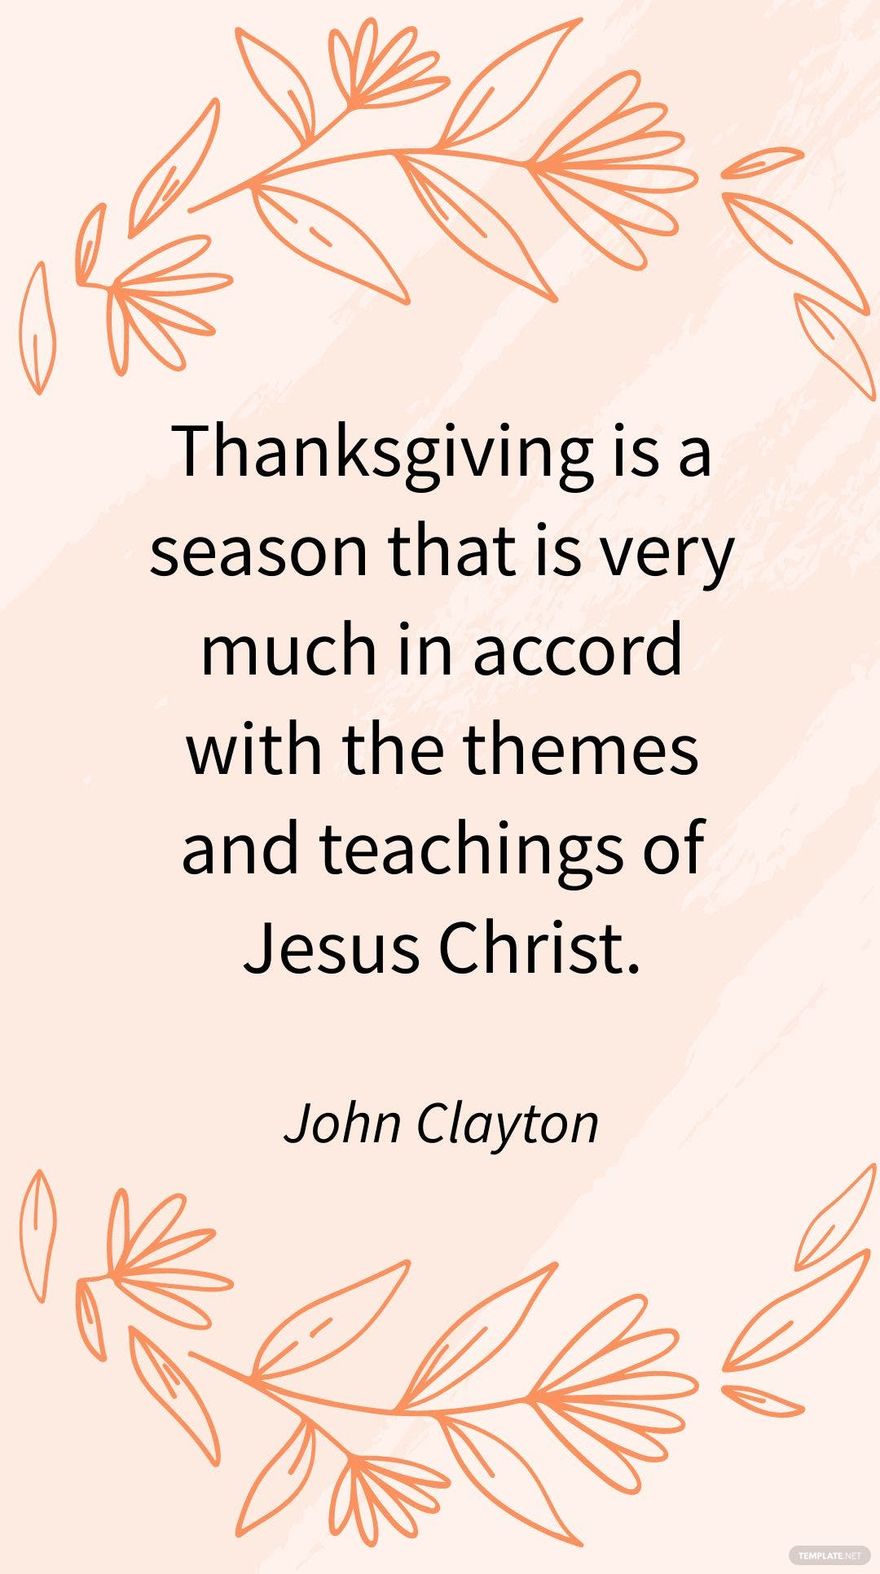 John Clayton - Thanksgiving is a season that is very much in accord with the themes and teachings of Jesus Christ. in JPG